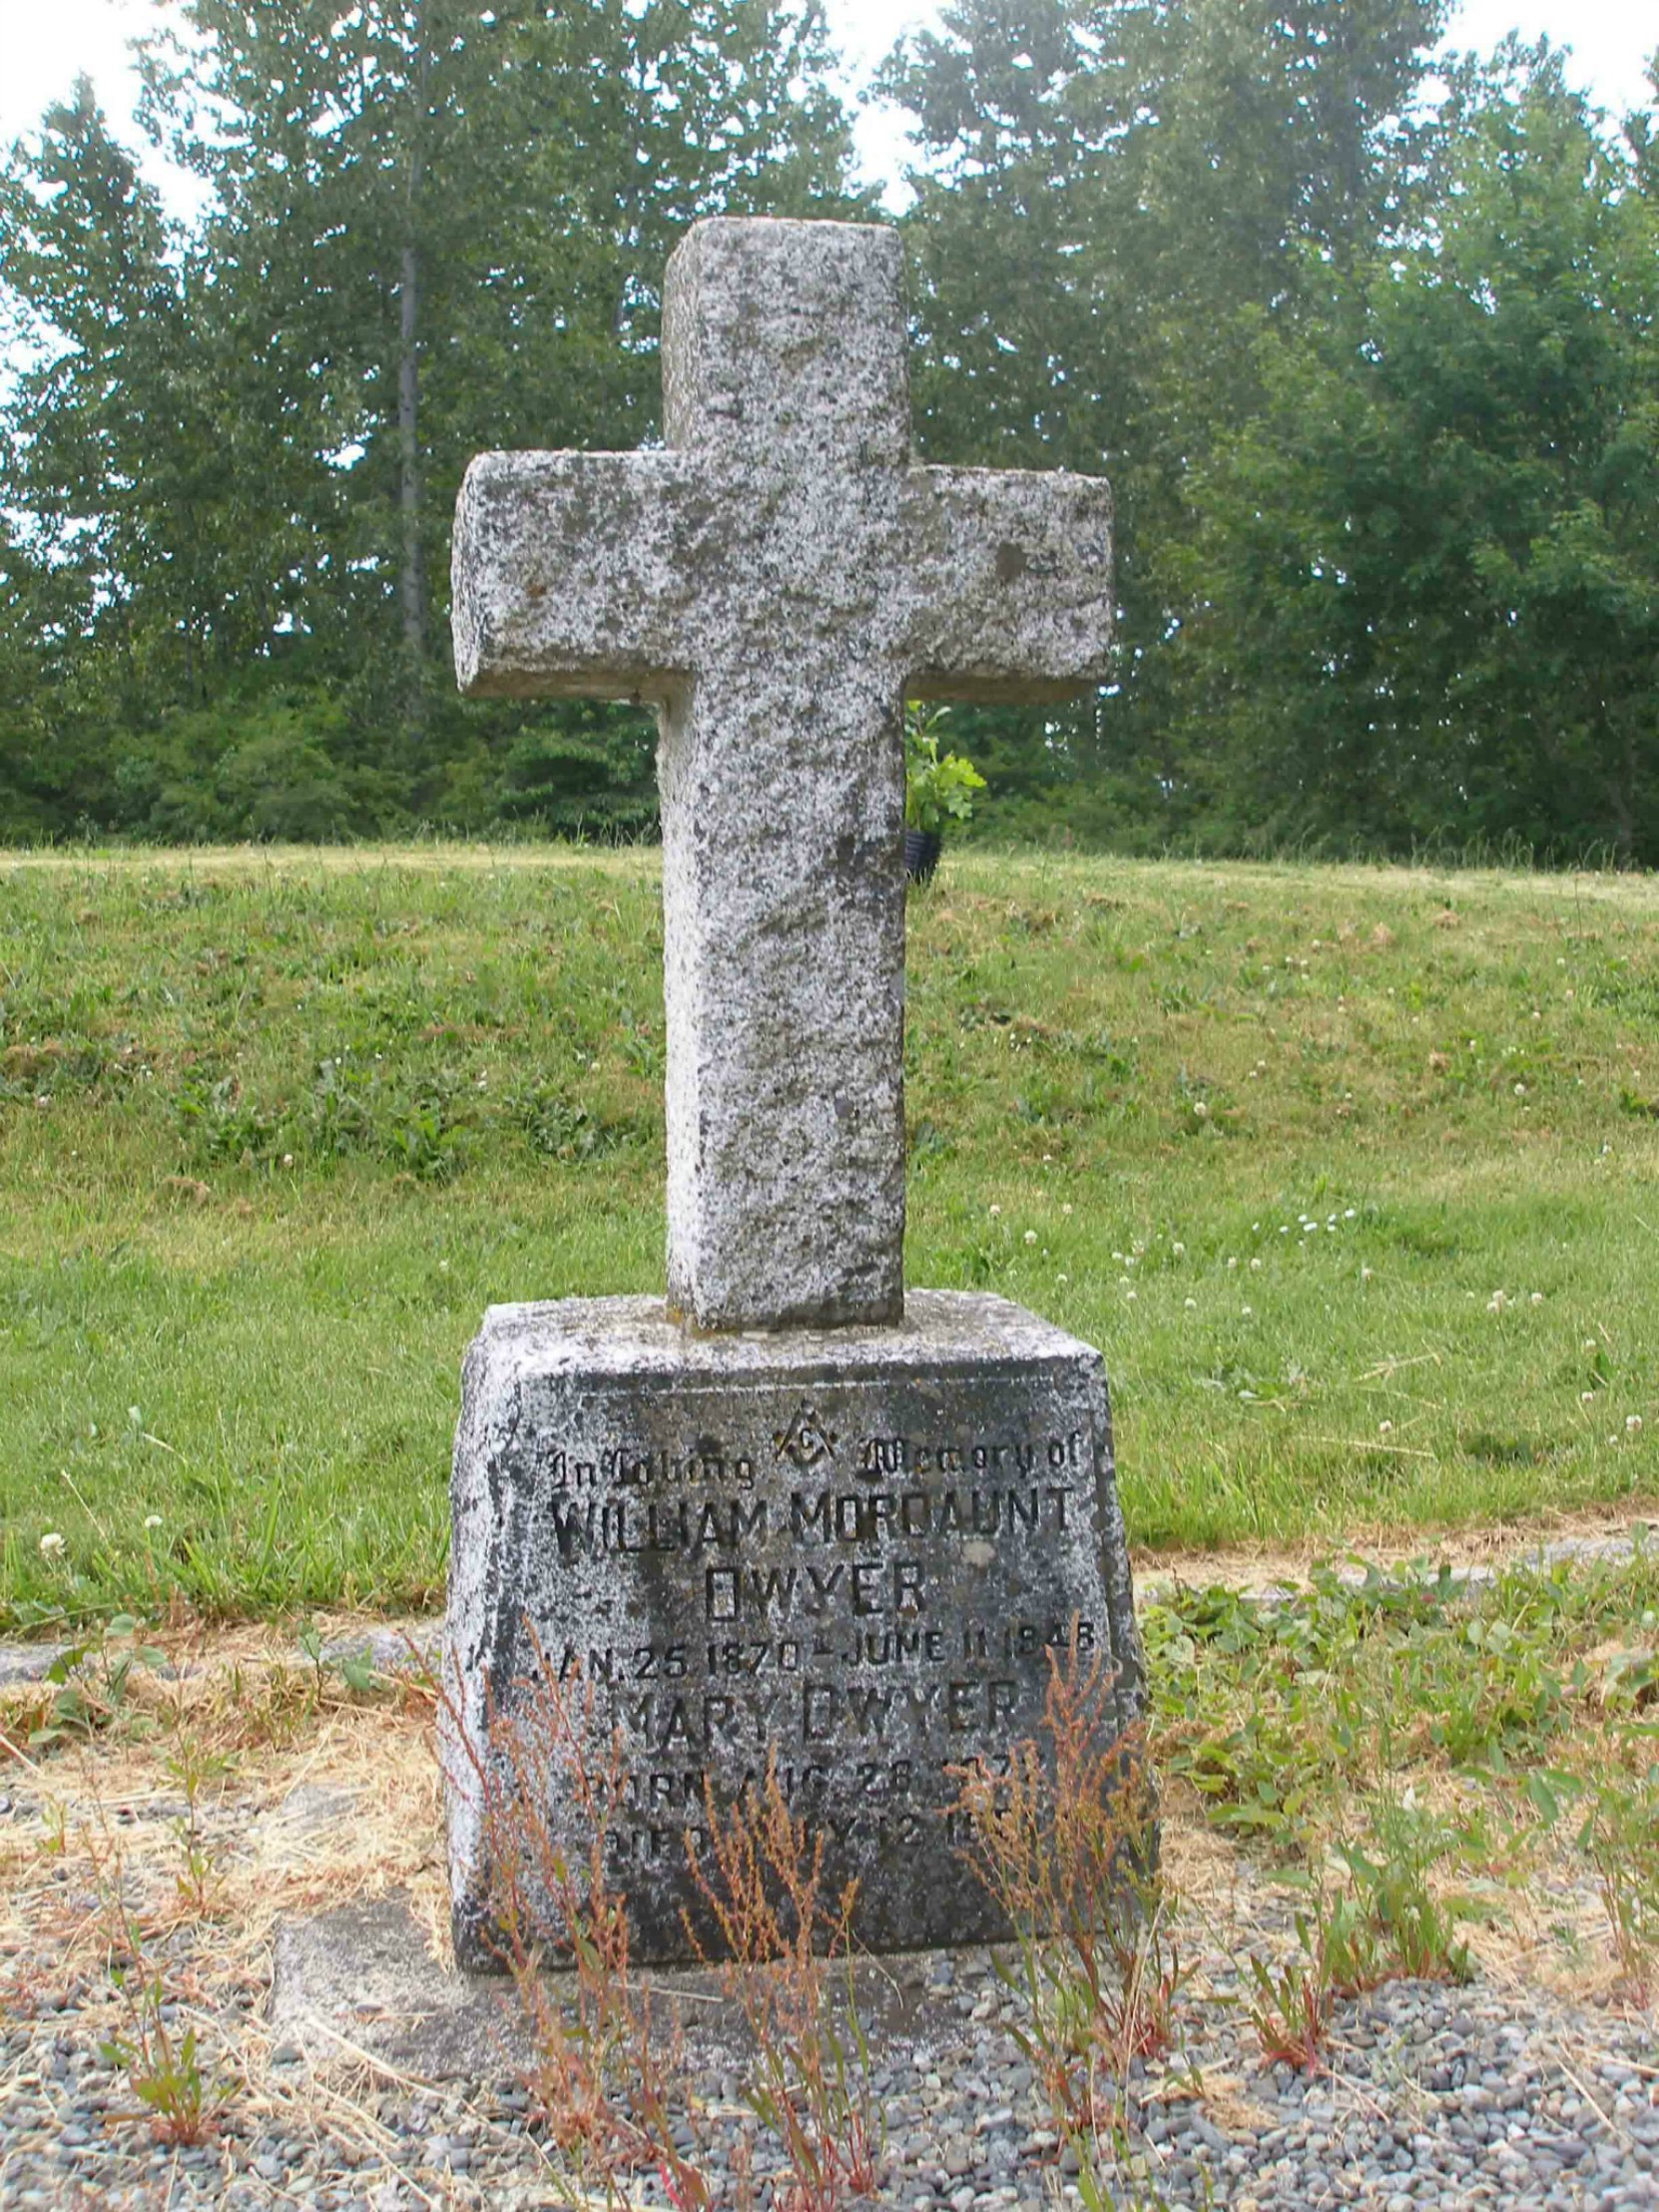 William Mordaunt Dwyer grave stone, St. Peter's Quamichan Anglican cemetery, North Cowichan